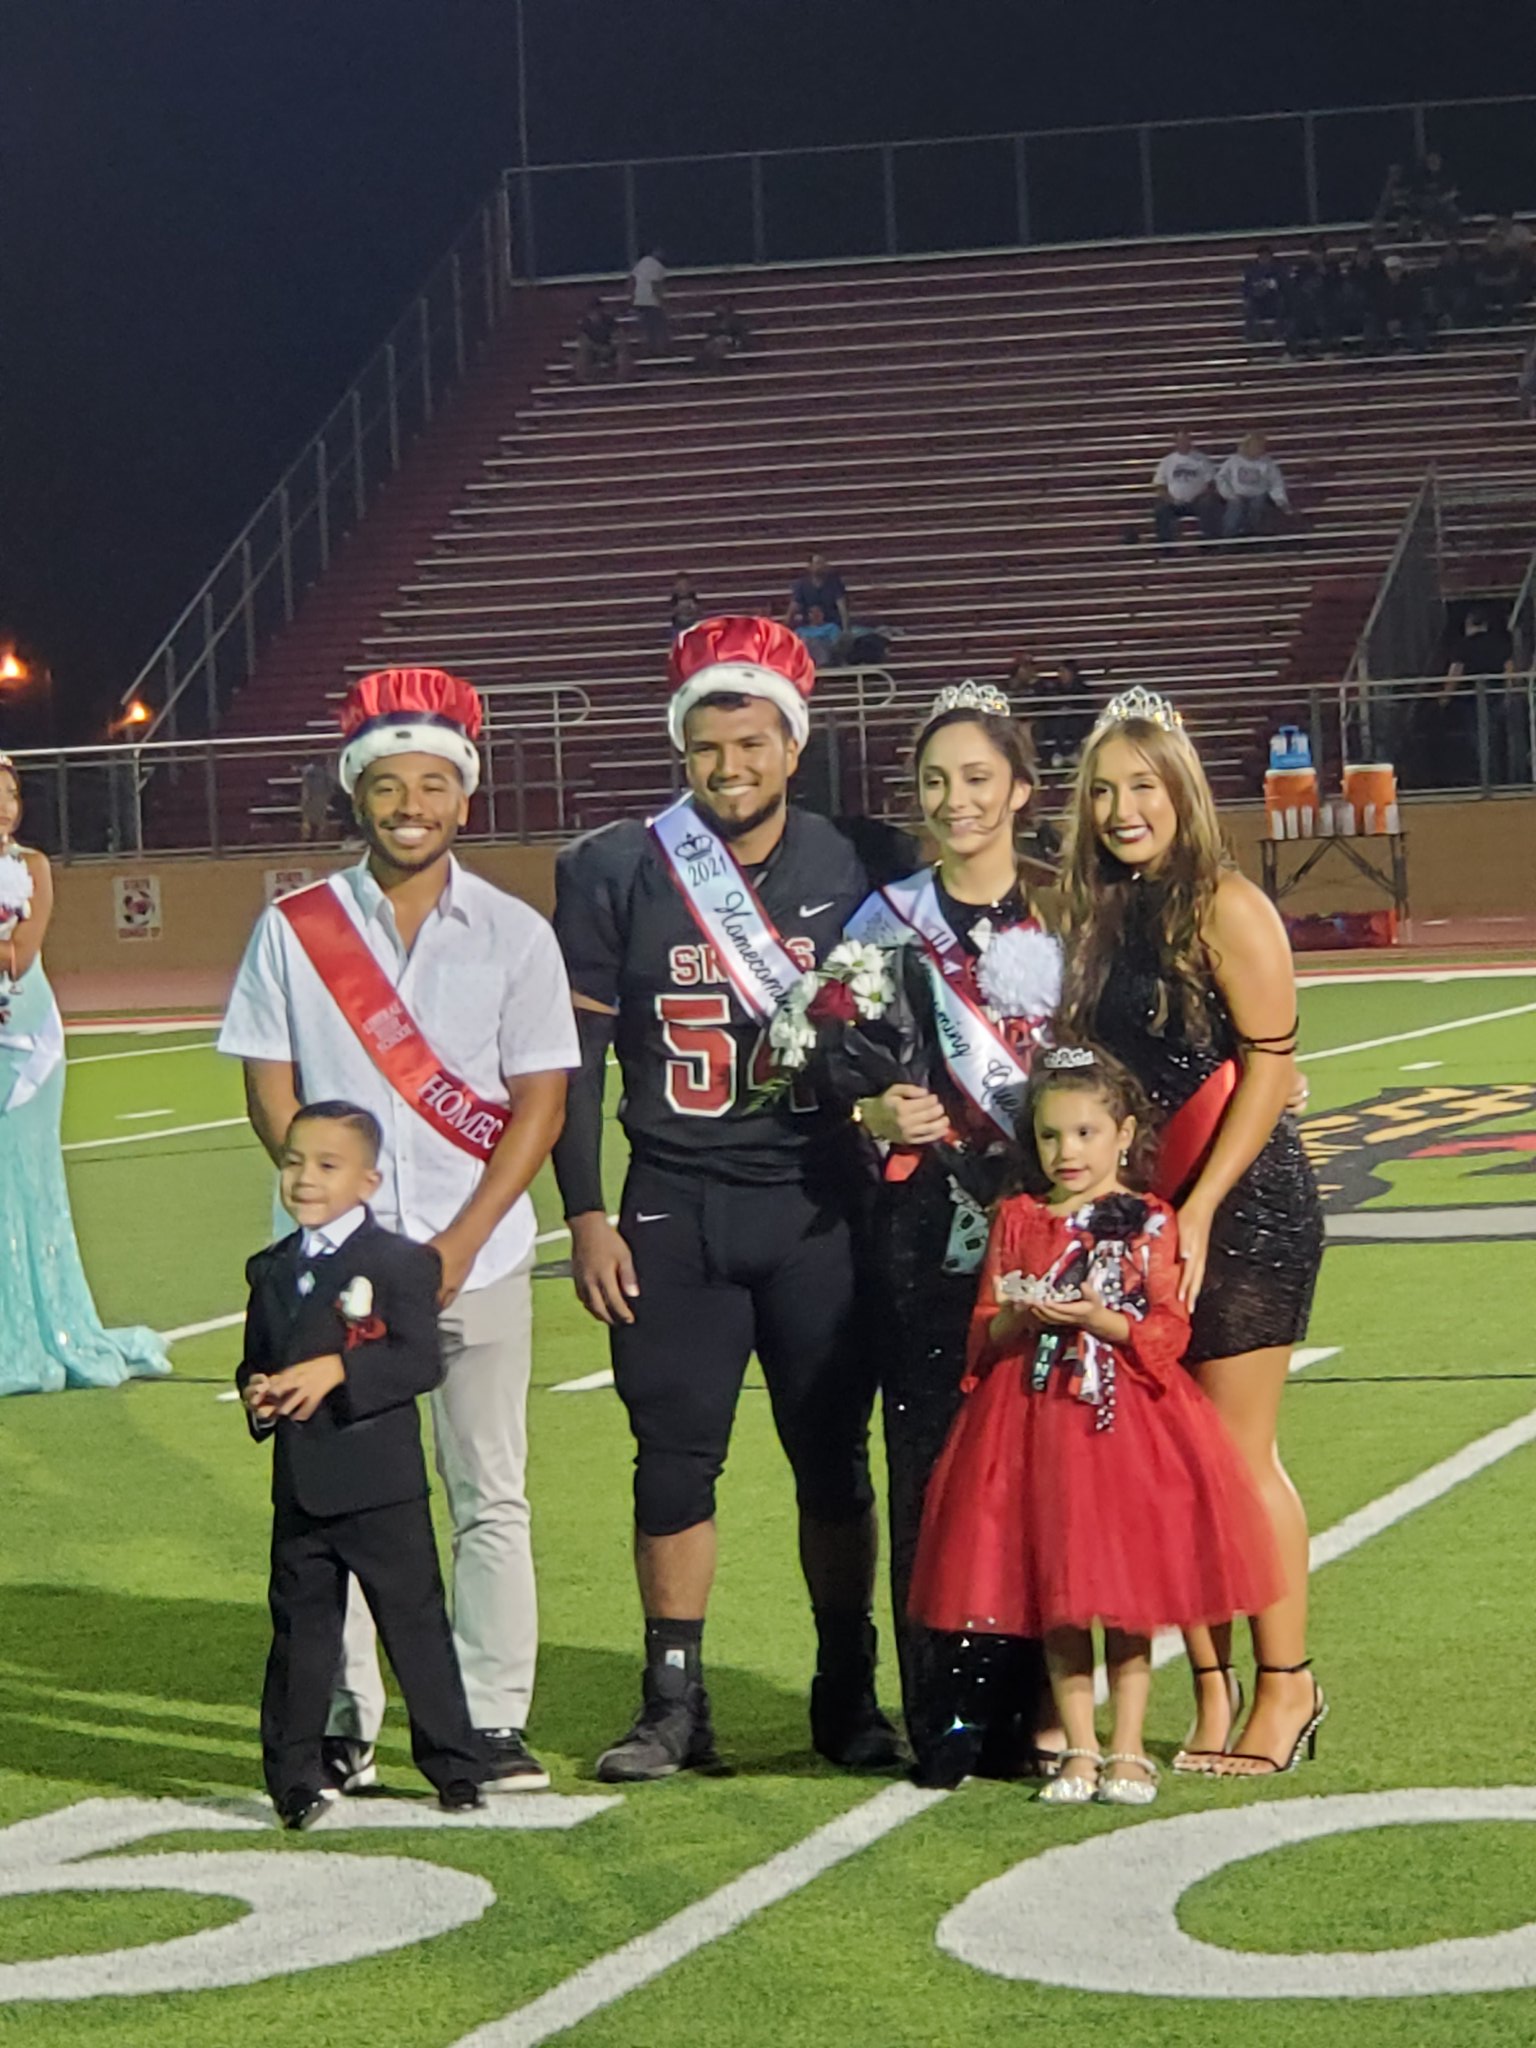 Avalos and Carrillo are Homecoming King and Queen